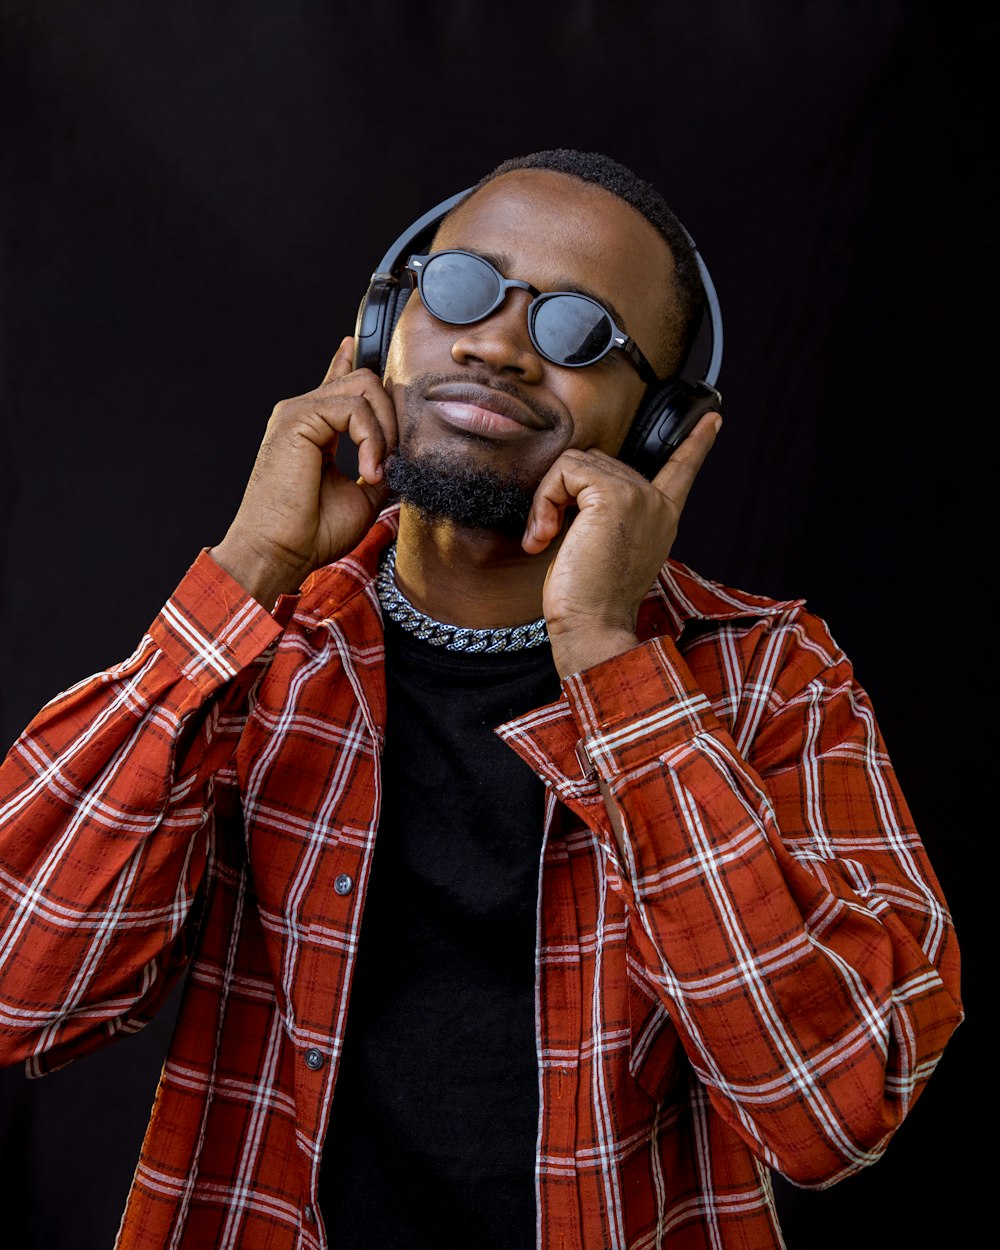 a man wearing sunglasses and a plaid shirt is listening to headphones